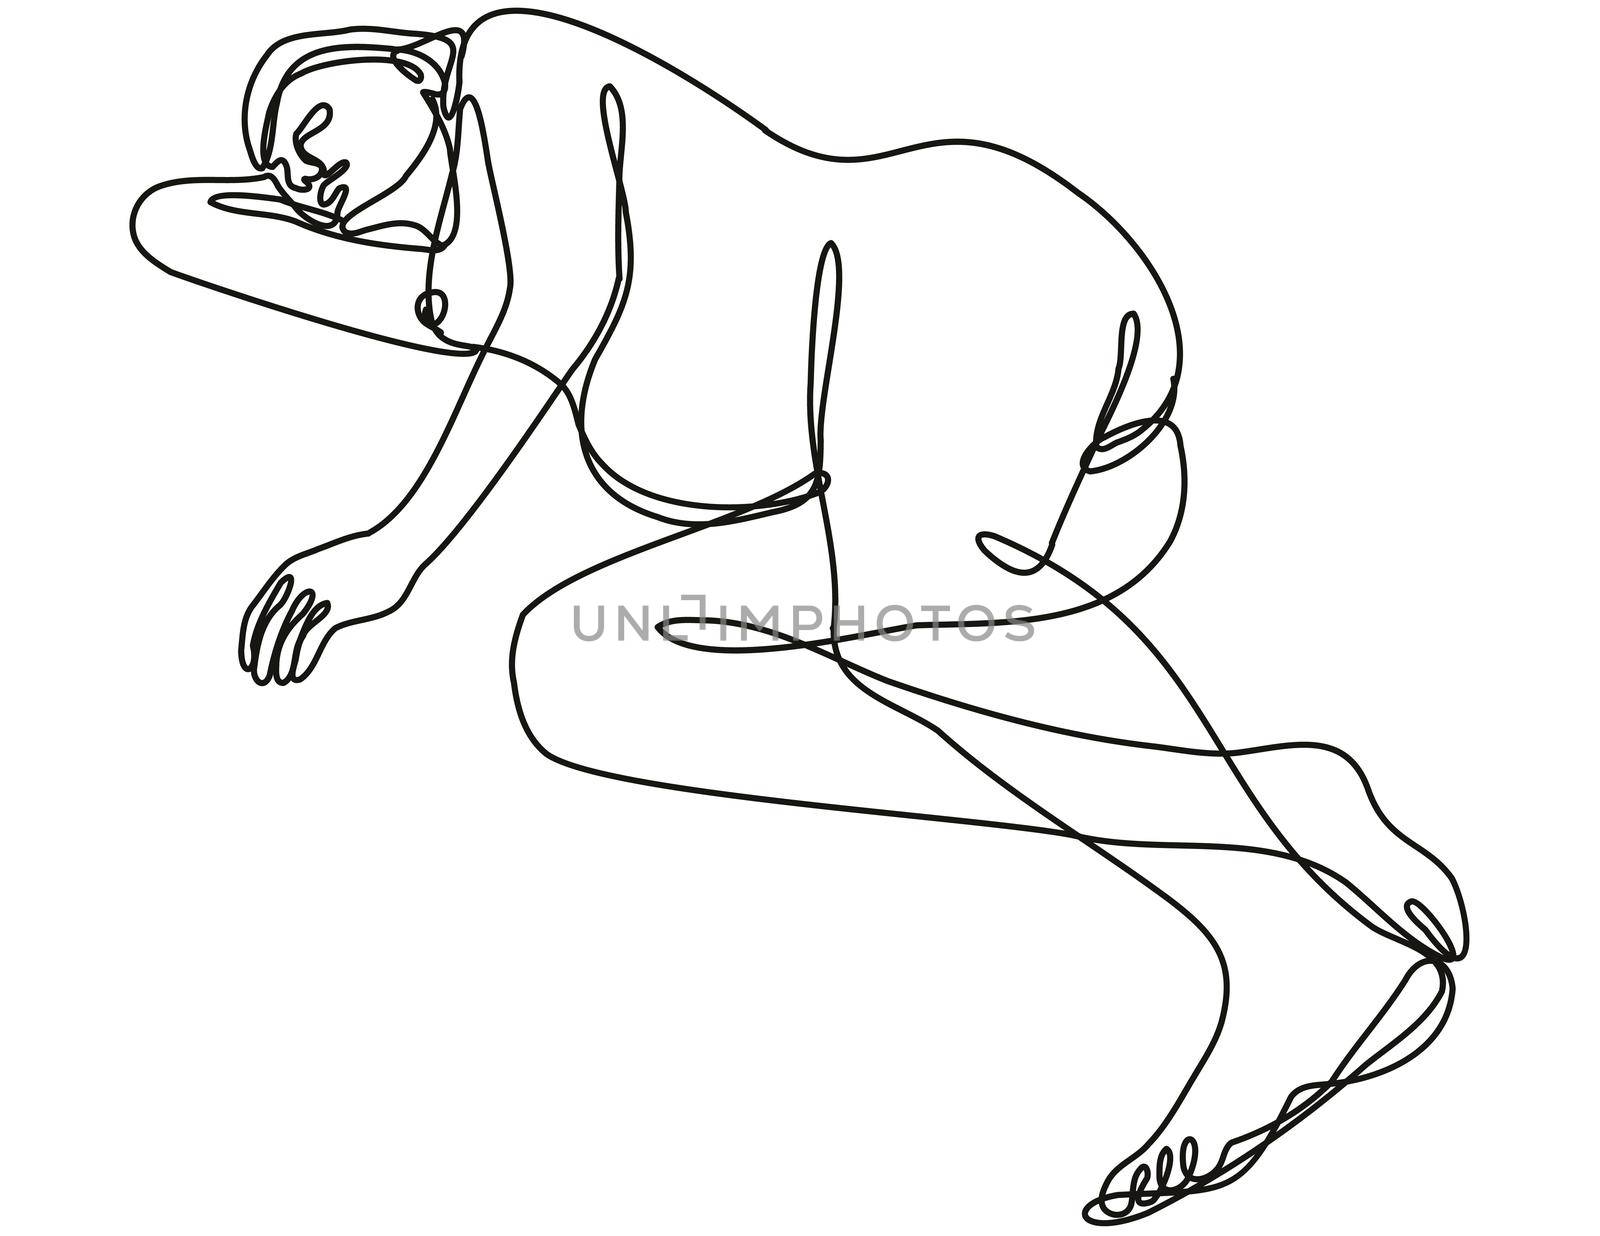 Female Nude Right lateral recumbent Position Continuous Line Doodle Drawing by patrimonio